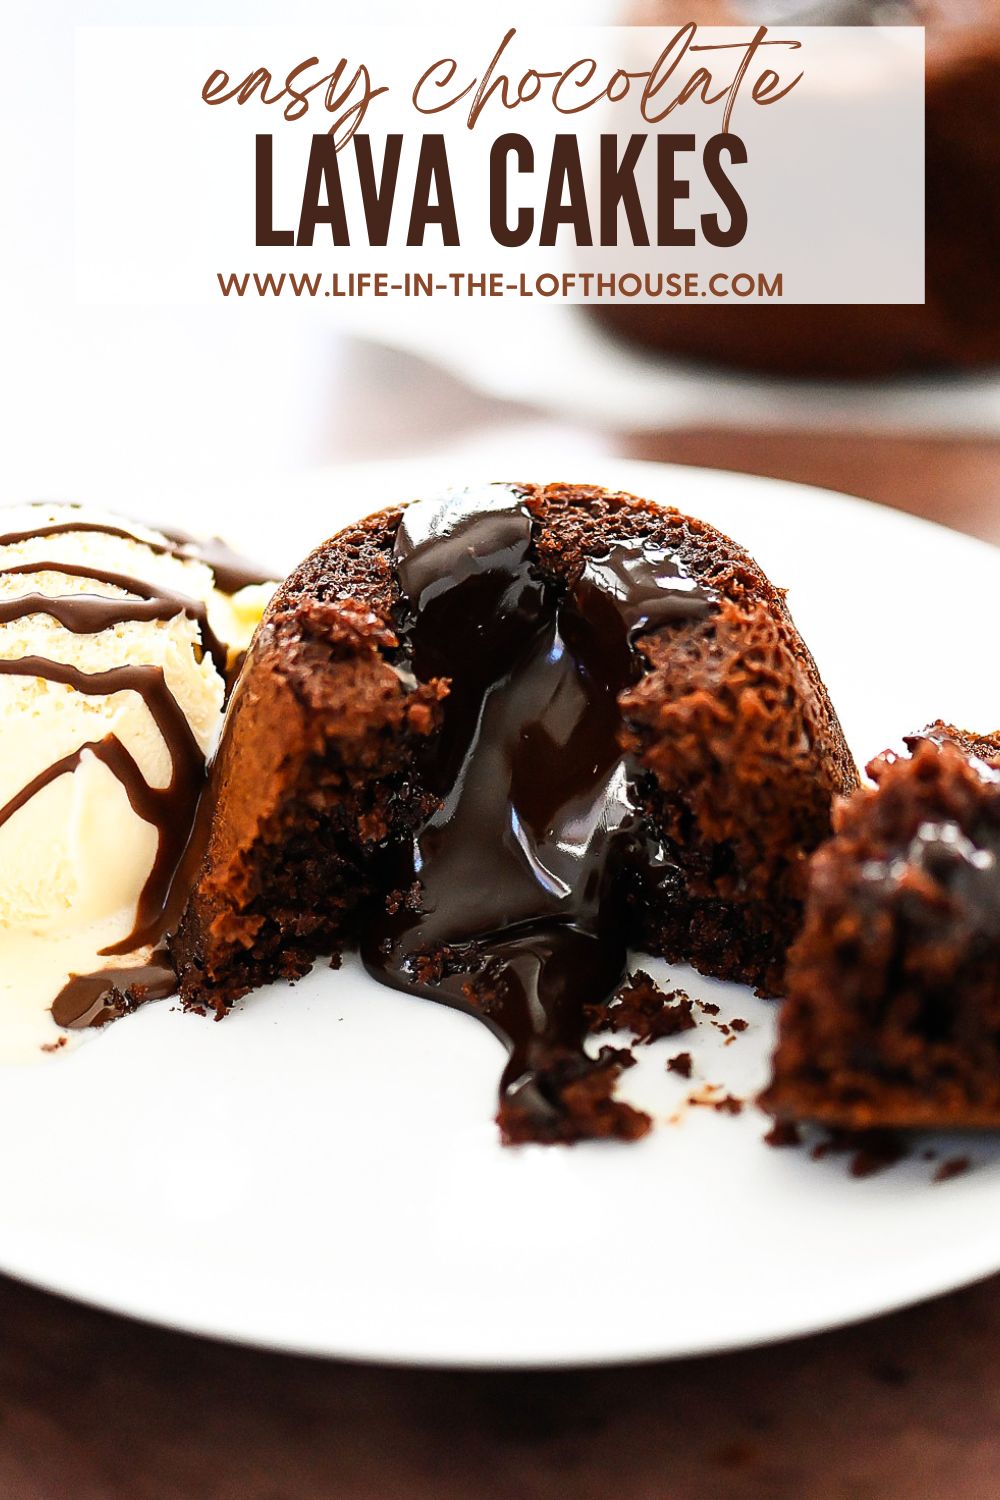 Easy Chocolate Lava Cakes are mini chocolate cakes with a warm center of hot fudge, topped with a big scoop of vanilla ice cream and then drenched in chocolate magic shell. Life-in-the-Lofthouse.com